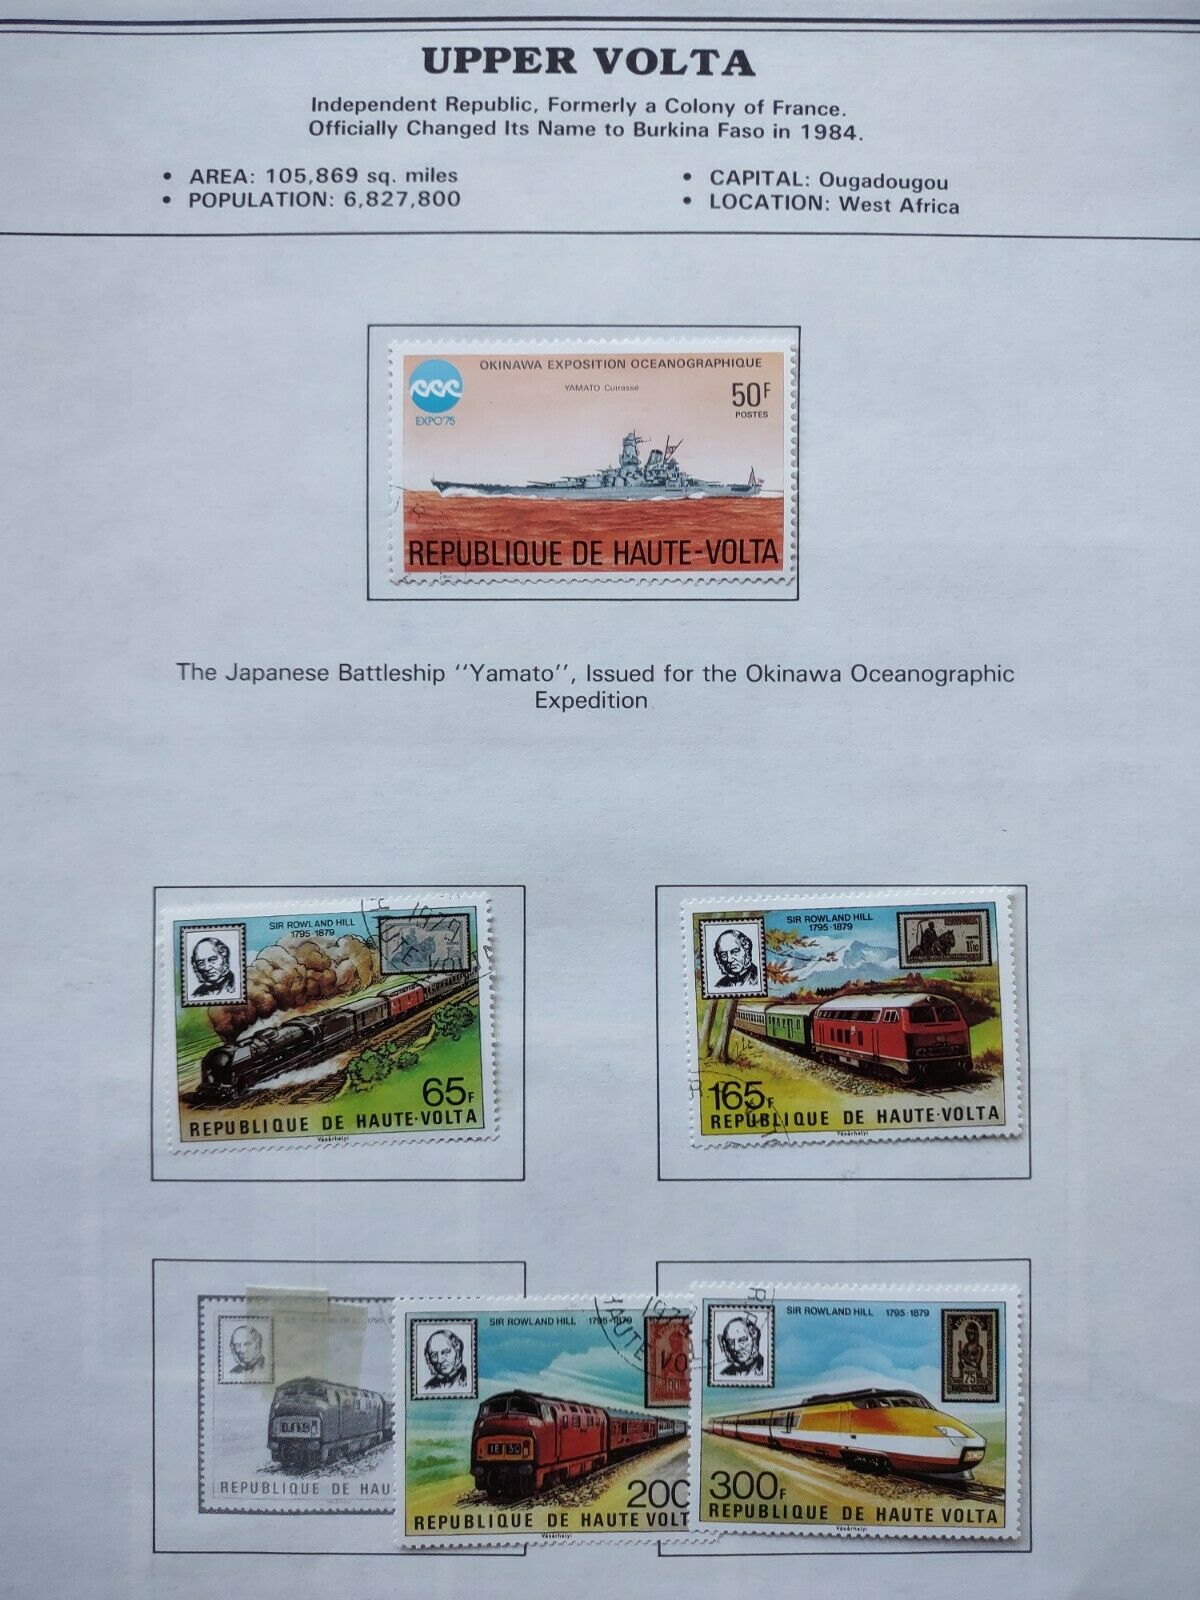 Upper Volta Stamps 1979 • Trains, Ships, Picasso On Album Page • $1.99 Low Start